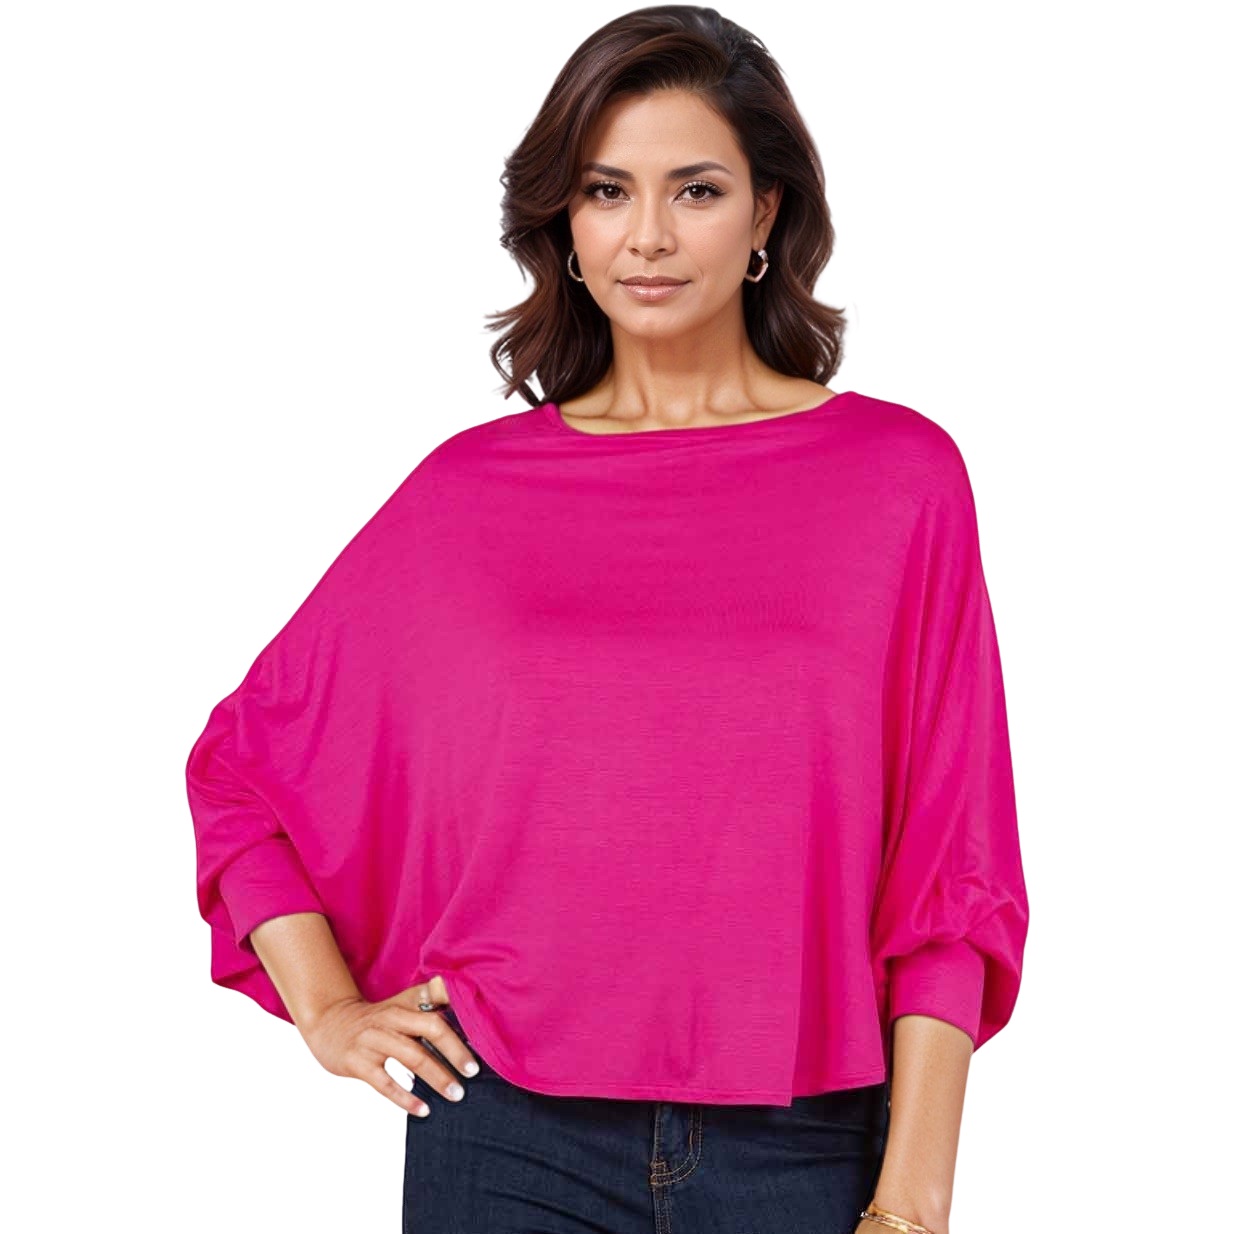 1818 - Fuchsia<br>
Poncho with Sleeves